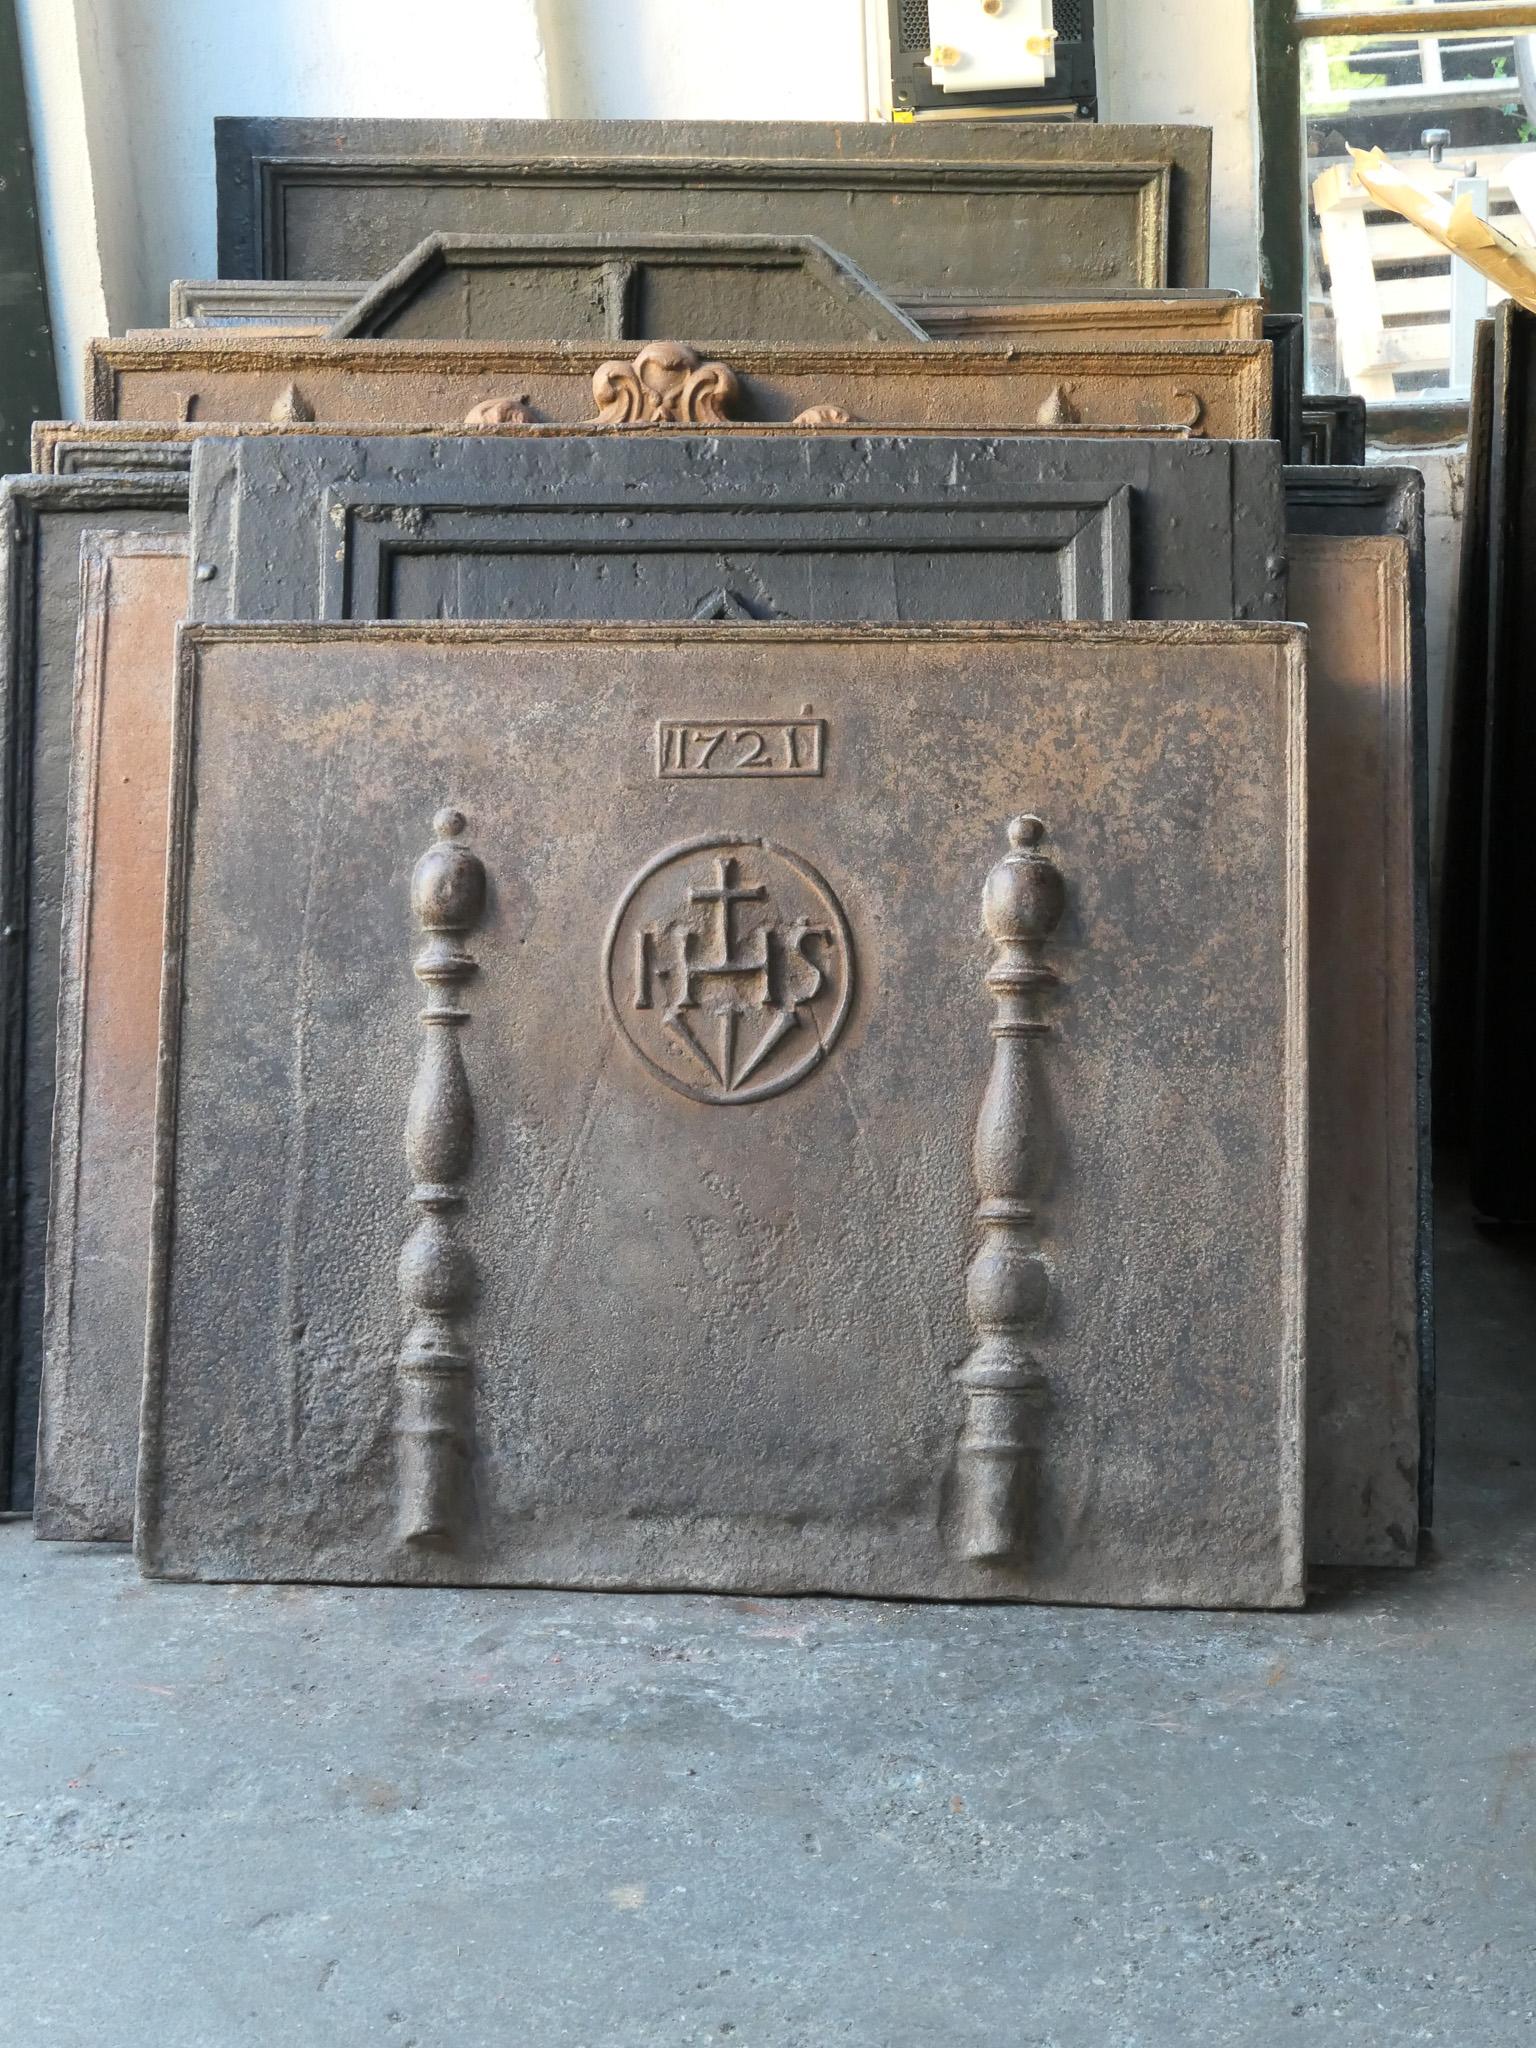 18th century French Louis XIV fireback with two pillars, a IHS monogram and the date of production 1721.

The monogram IHS stands for Iesus Hominum Salvator (Jesus the Savior of Humanity) or In Hoc Signo (In this sign will you win). The pillars